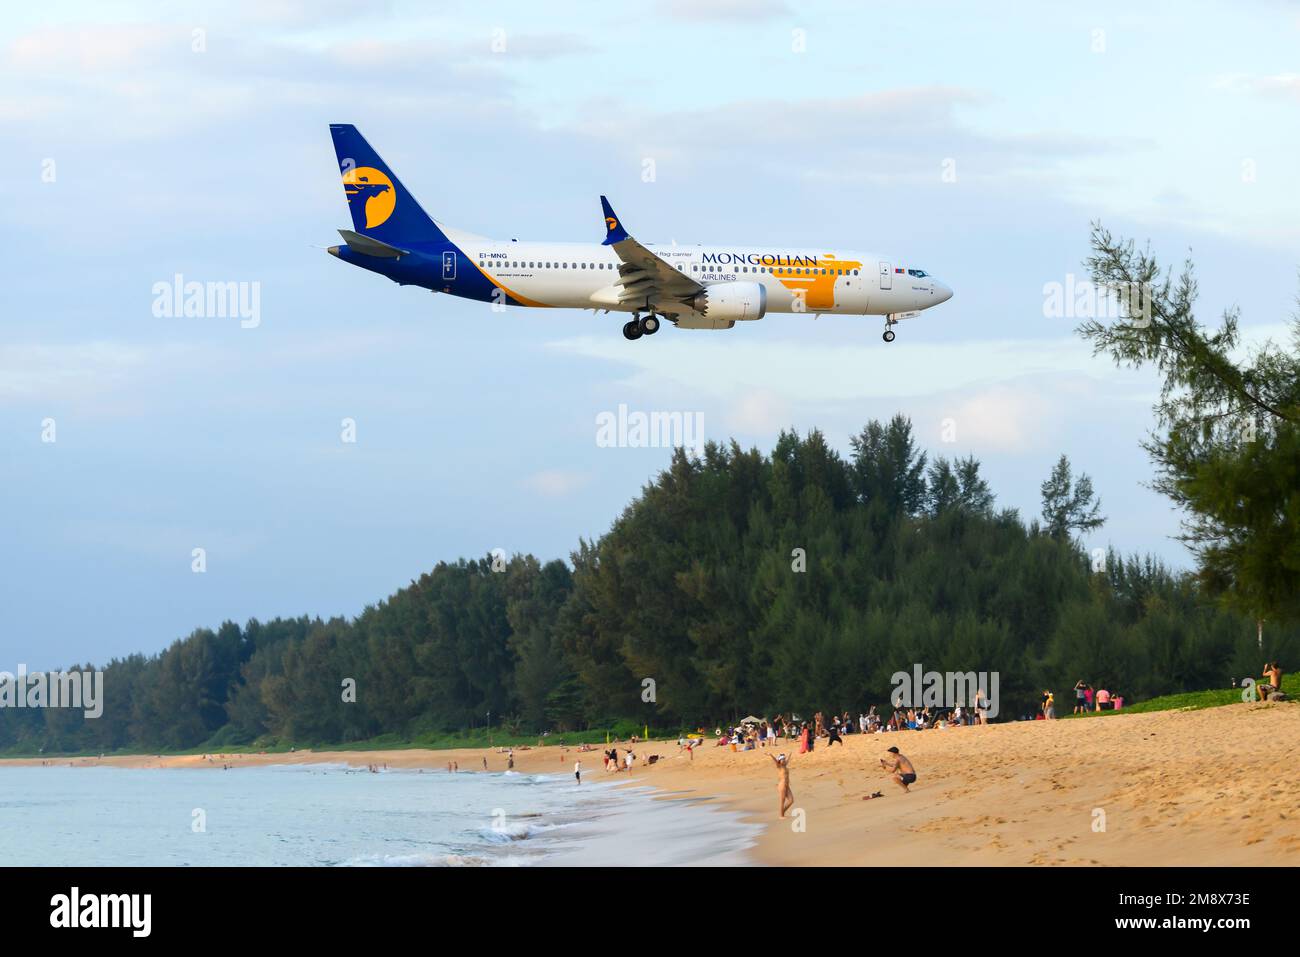 MIAT Mongolian Airlines Boeing 737 Max aircraft over Mai Khao Beach. Airline from Mongolia, MIAT Boeing 737 airplane. Stock Photo